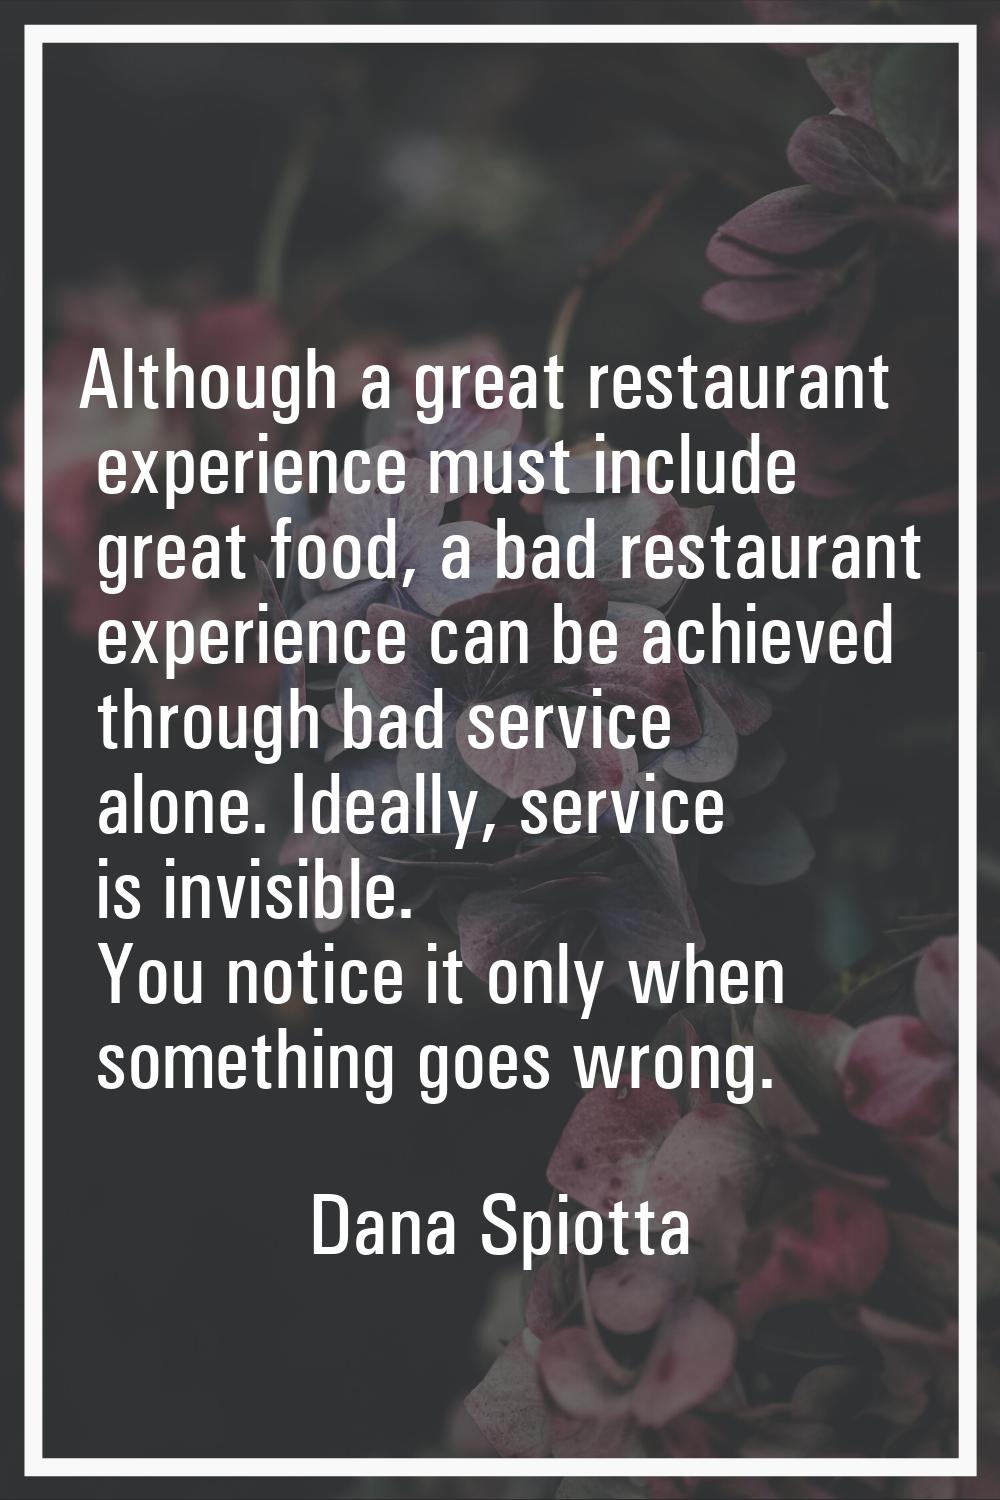 Although a great restaurant experience must include great food, a bad restaurant experience can be 